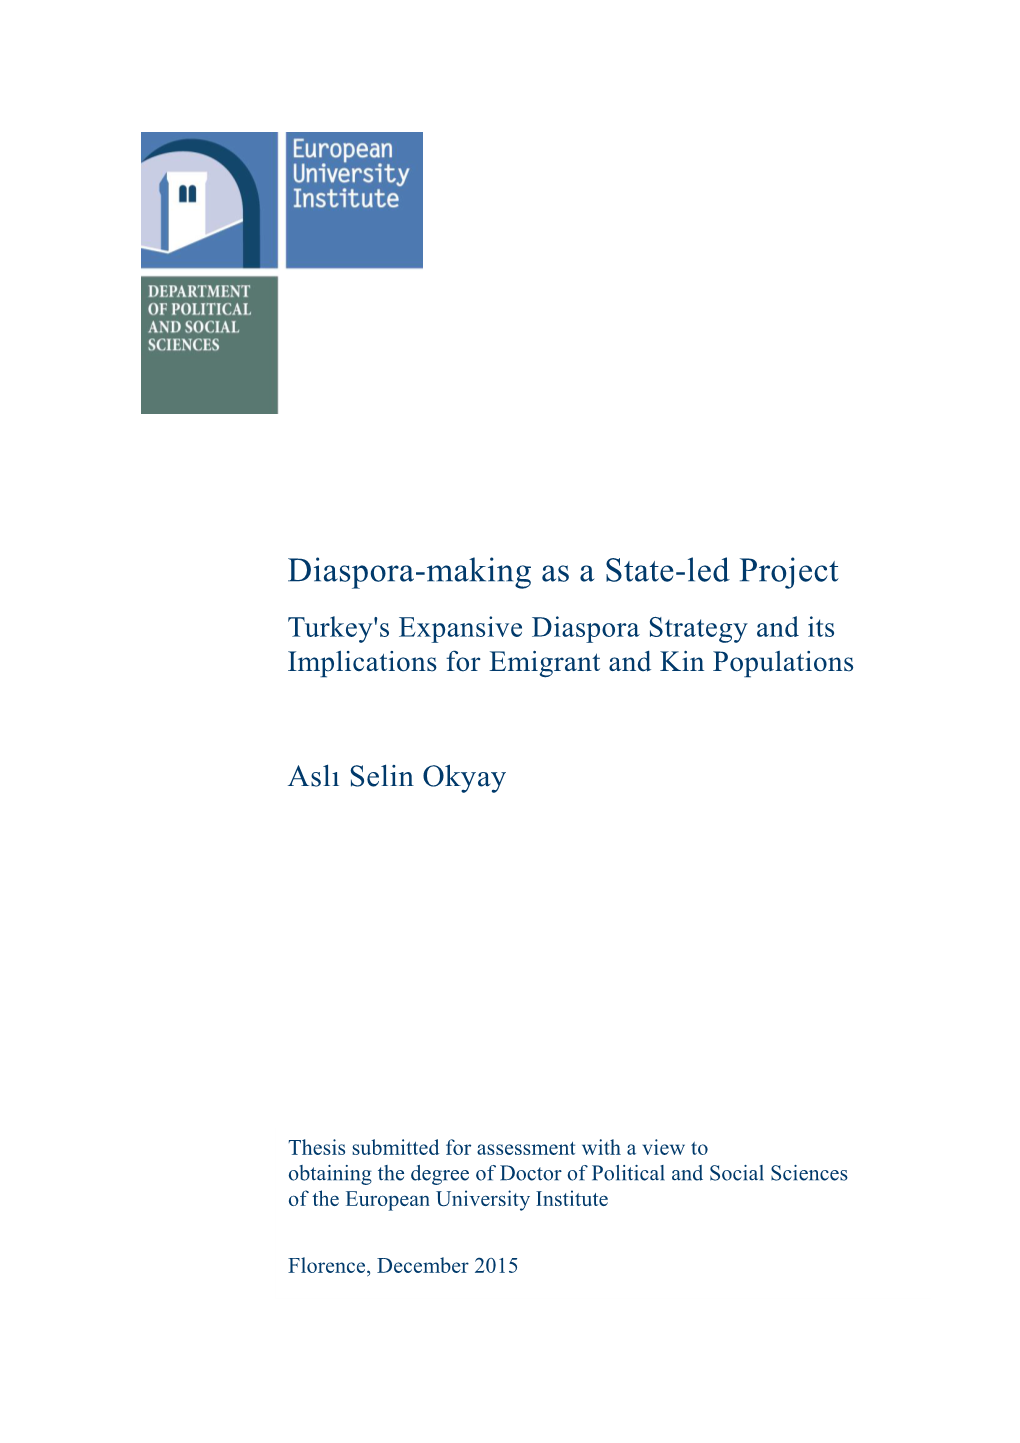 Diaspora-Making As a State-Led Project Turkey's Expansive Diaspora Strategy and Its Implications for Emigrant and Kin Populations